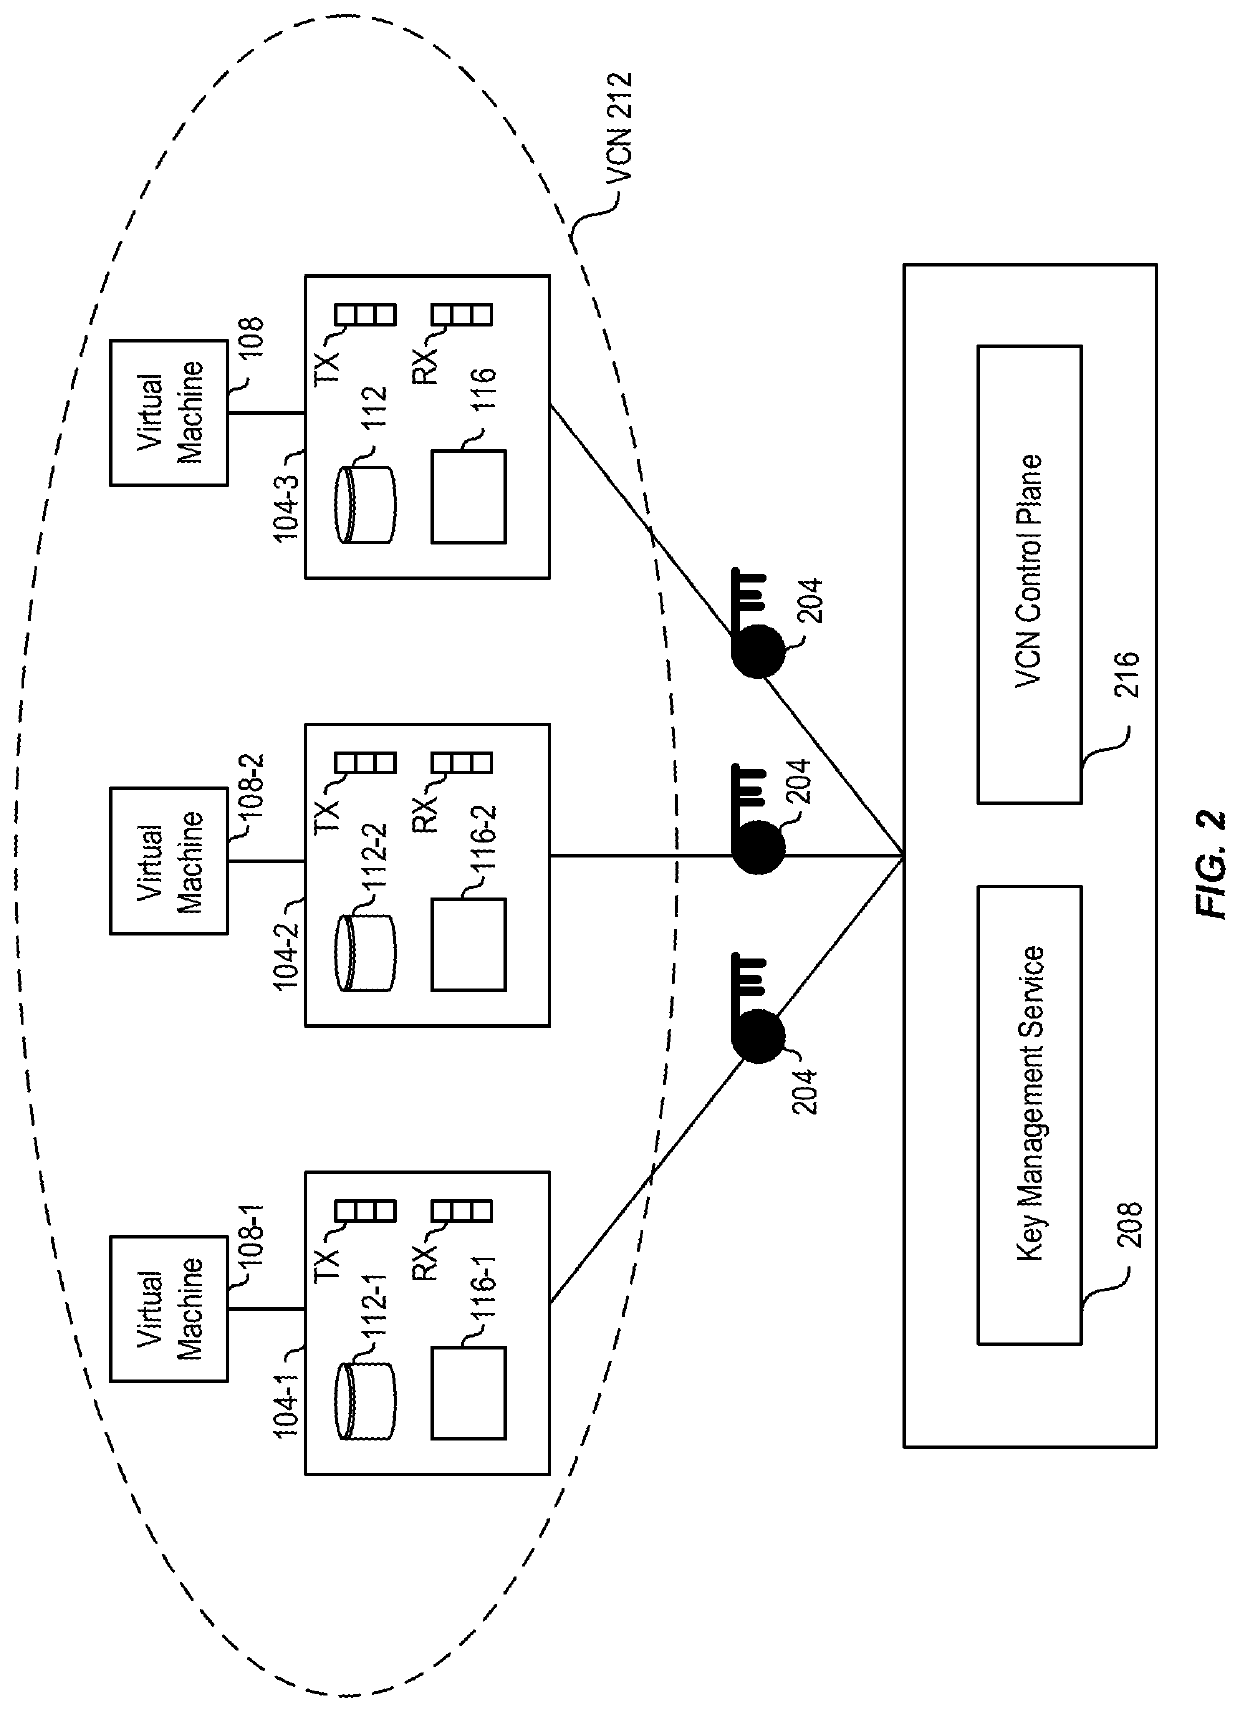 Mechanism to provide customer vcn network encryption using customer-managed keys in network virtualization device